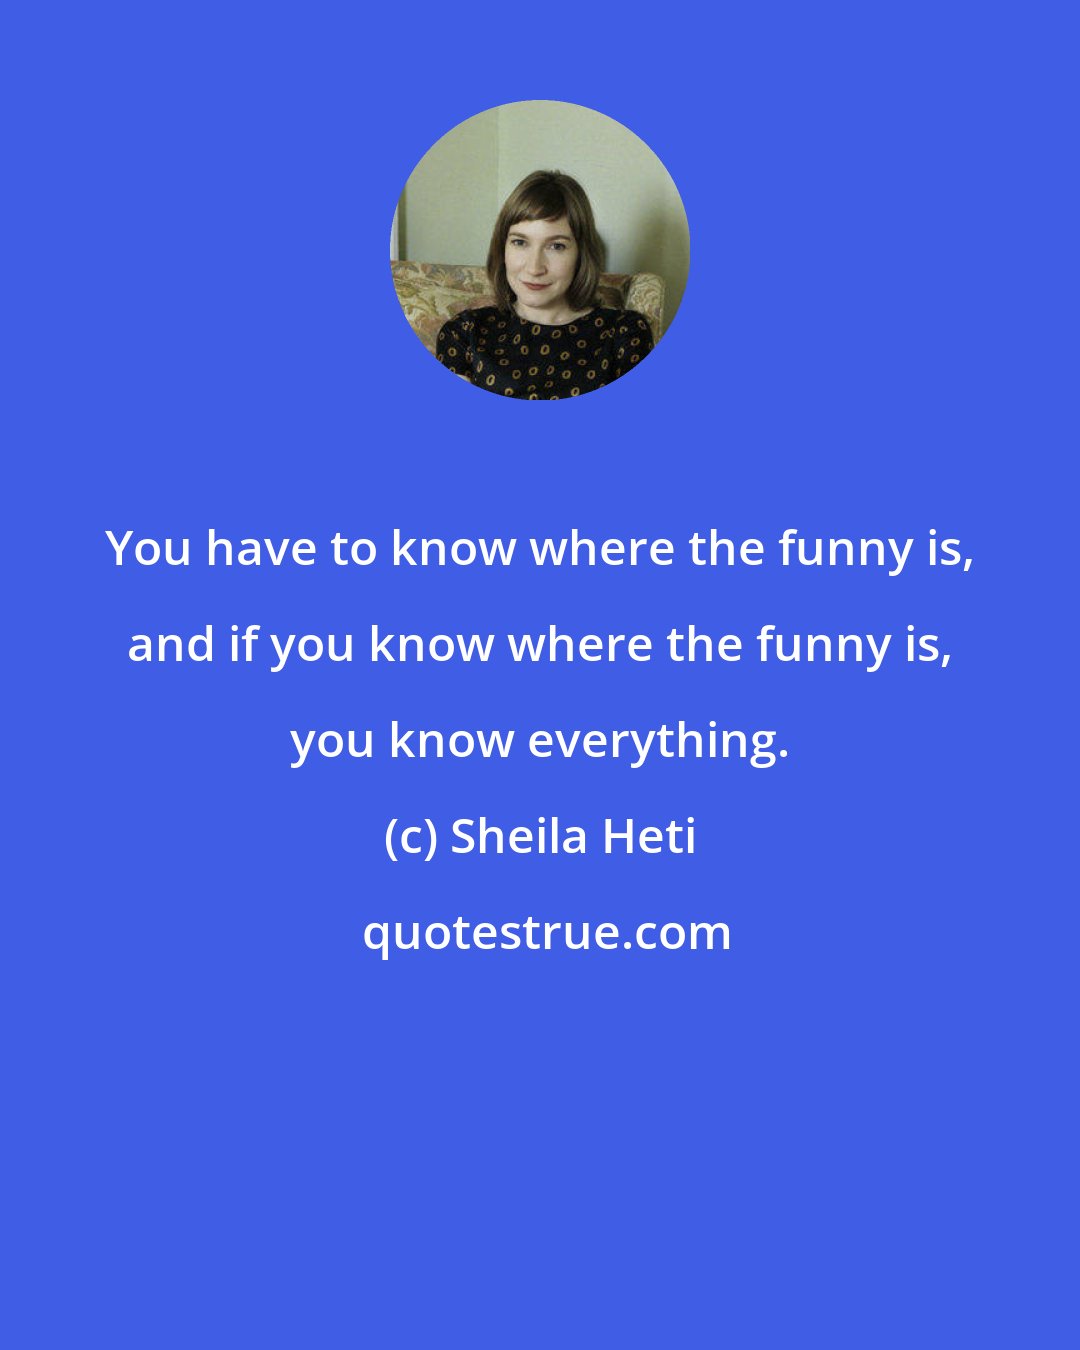 Sheila Heti: You have to know where the funny is, and if you know where the funny is, you know everything.